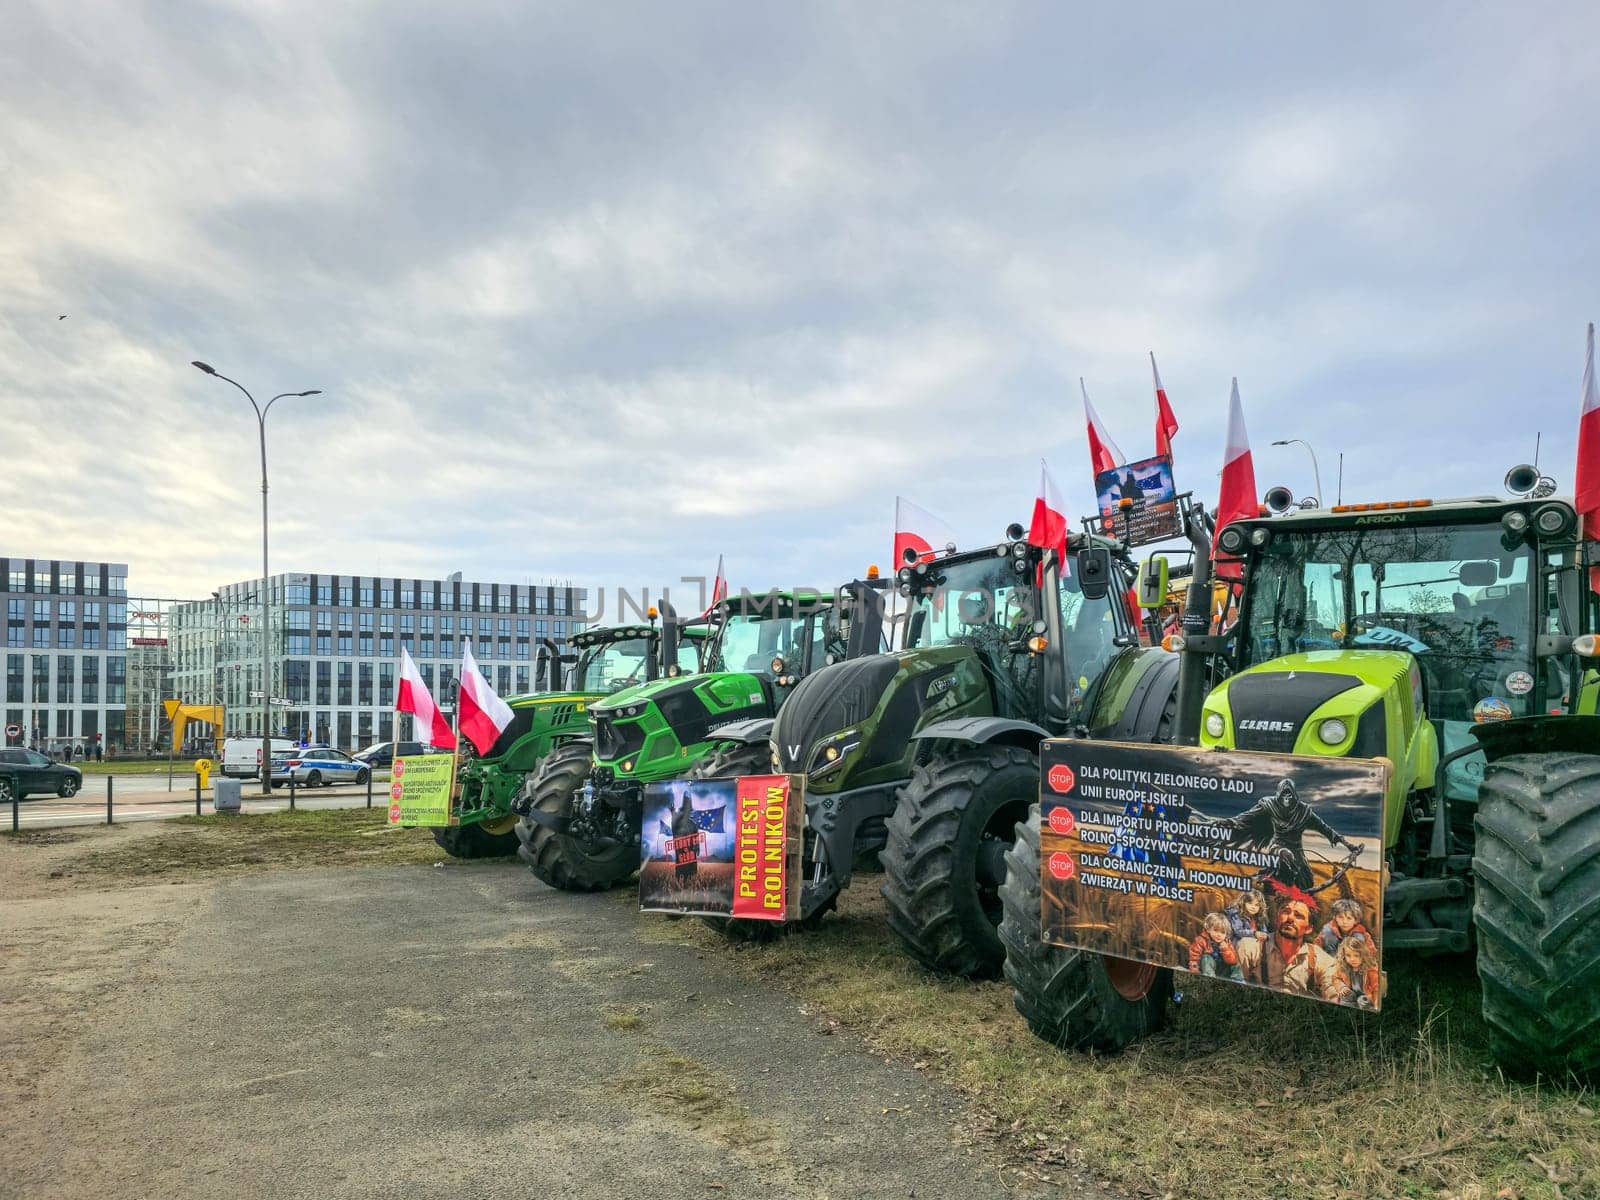 Wroclaw, Poland, February 15, 2024: Farmers protest against the European Union's anti-agricultural policies. Several farm tractors are parked in front of office buildings under a cloudy sky